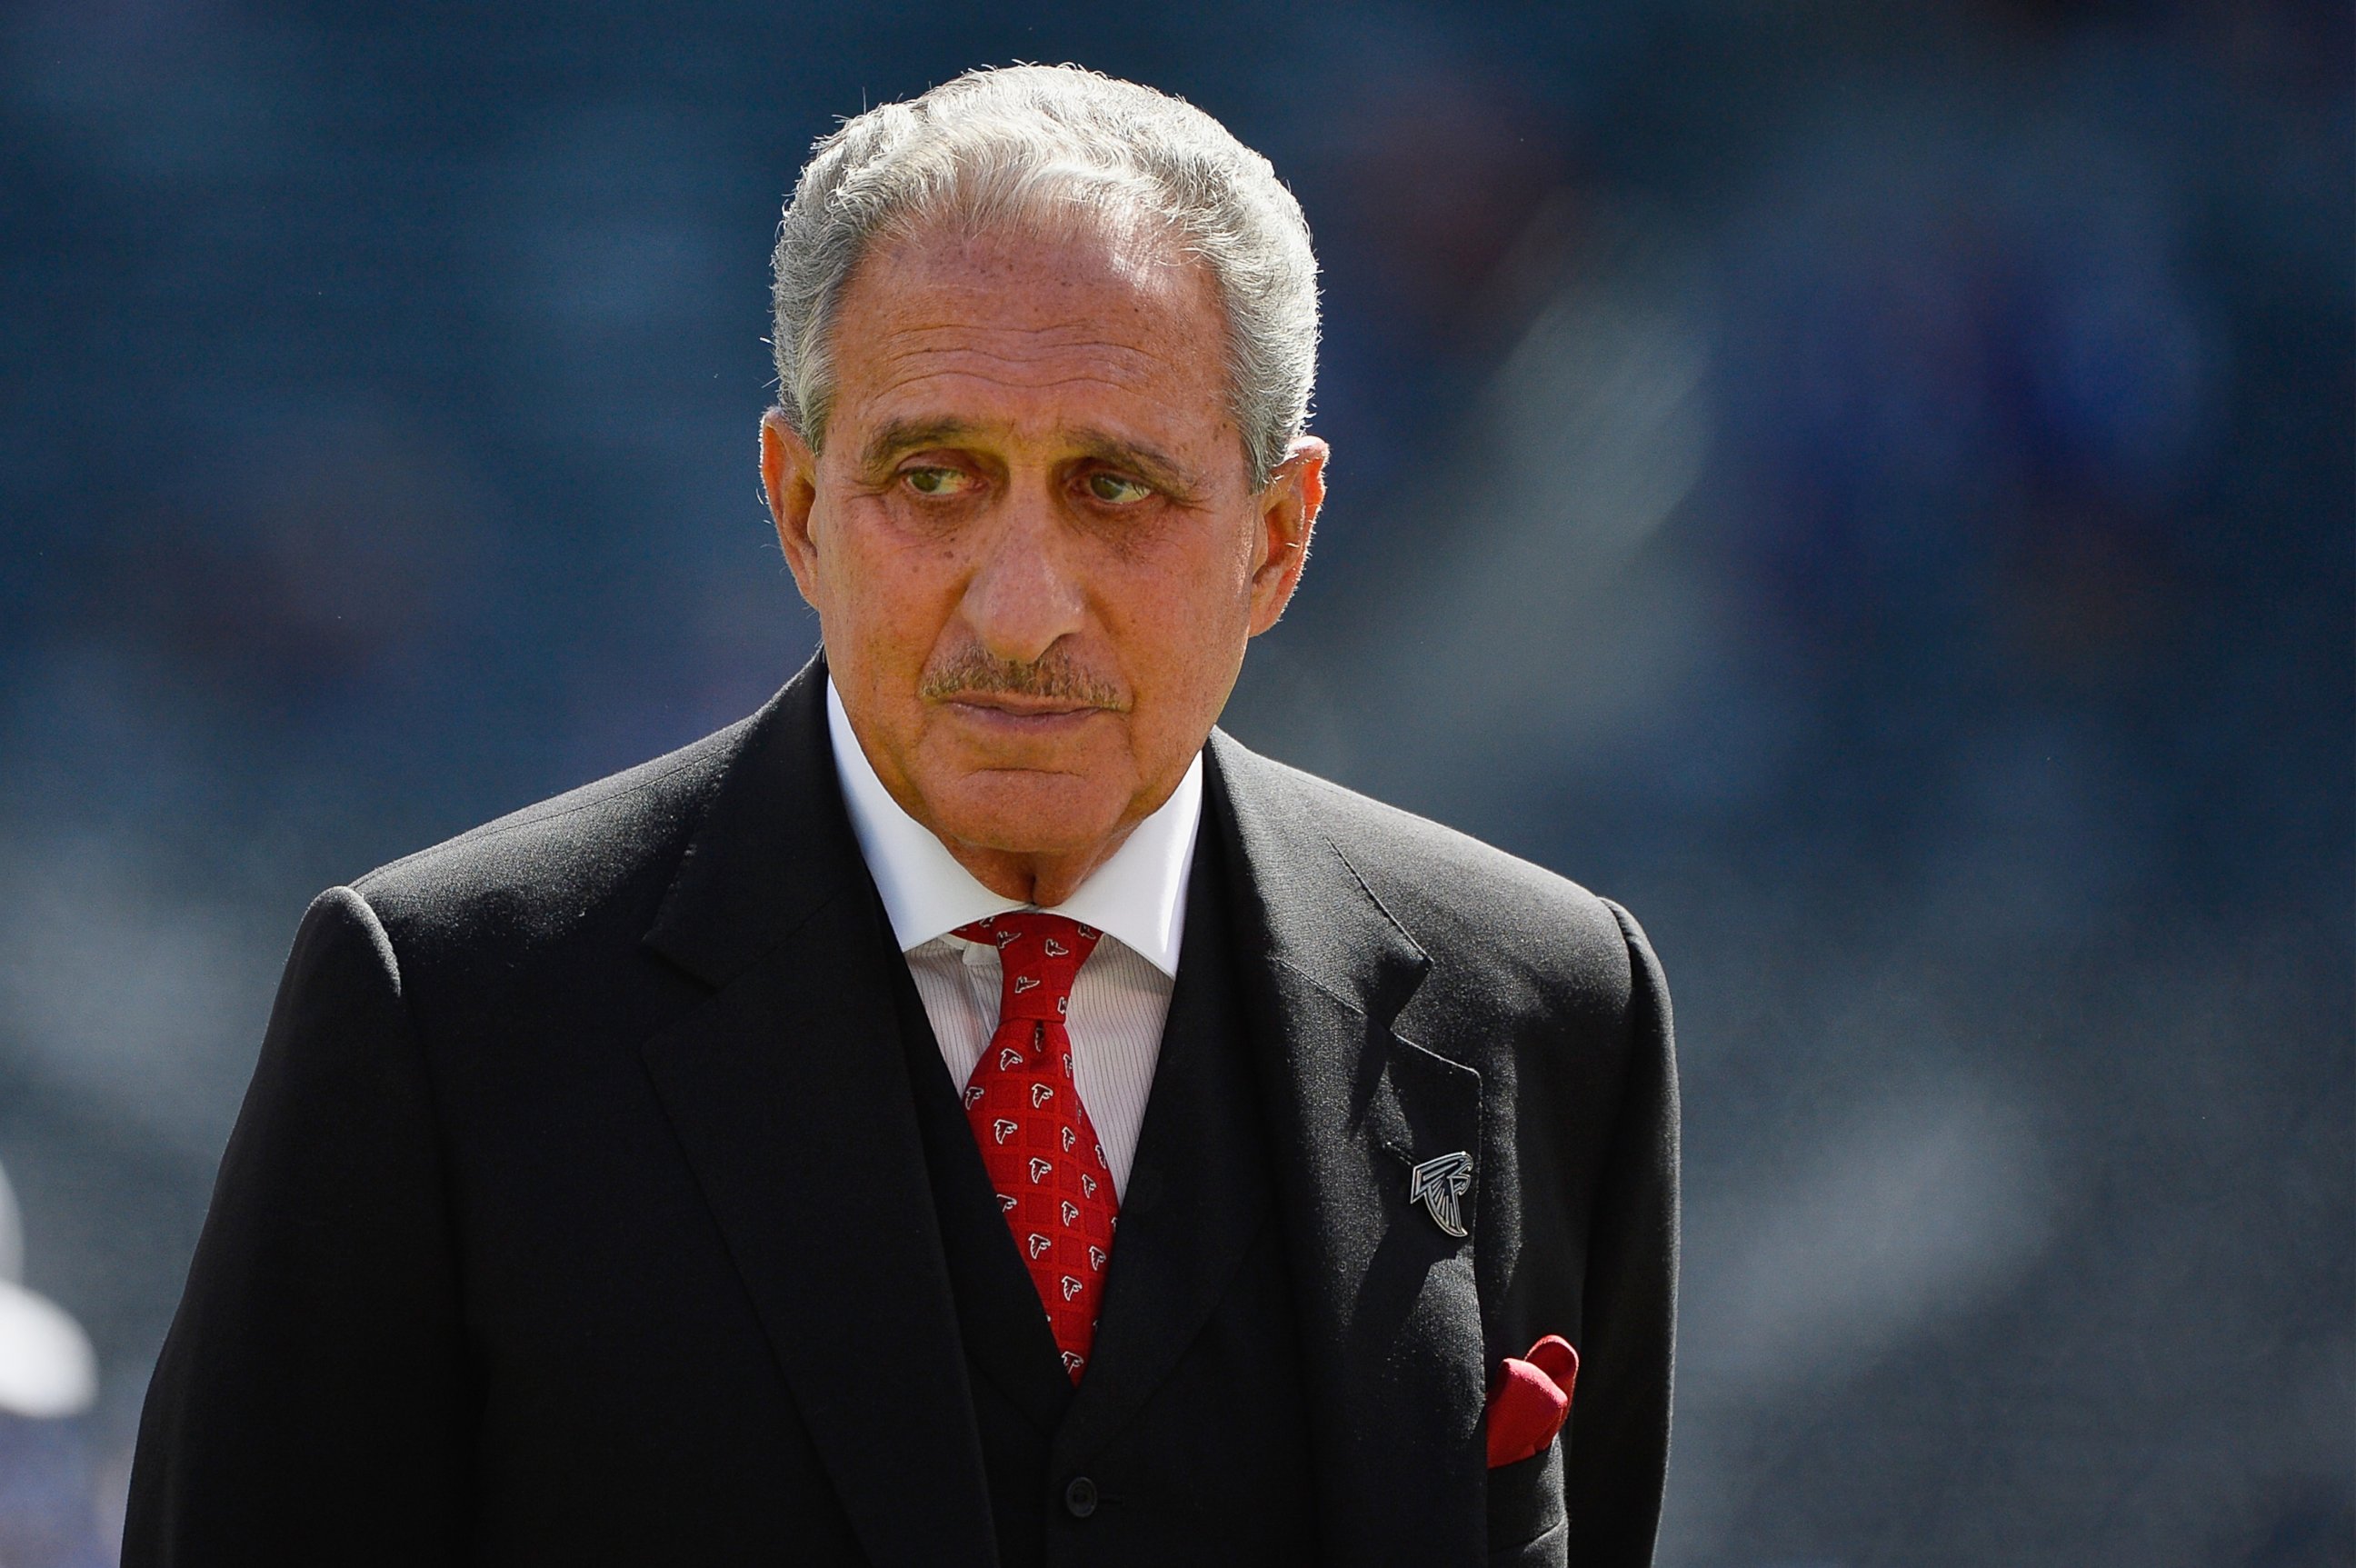 PHOTO: Arthur Blank owner of the Atlanta Falcons looks on prior to a game against the New York Giants at MetLife Stadium on Sep. 20, 2015 in East Rutherford, N.J.